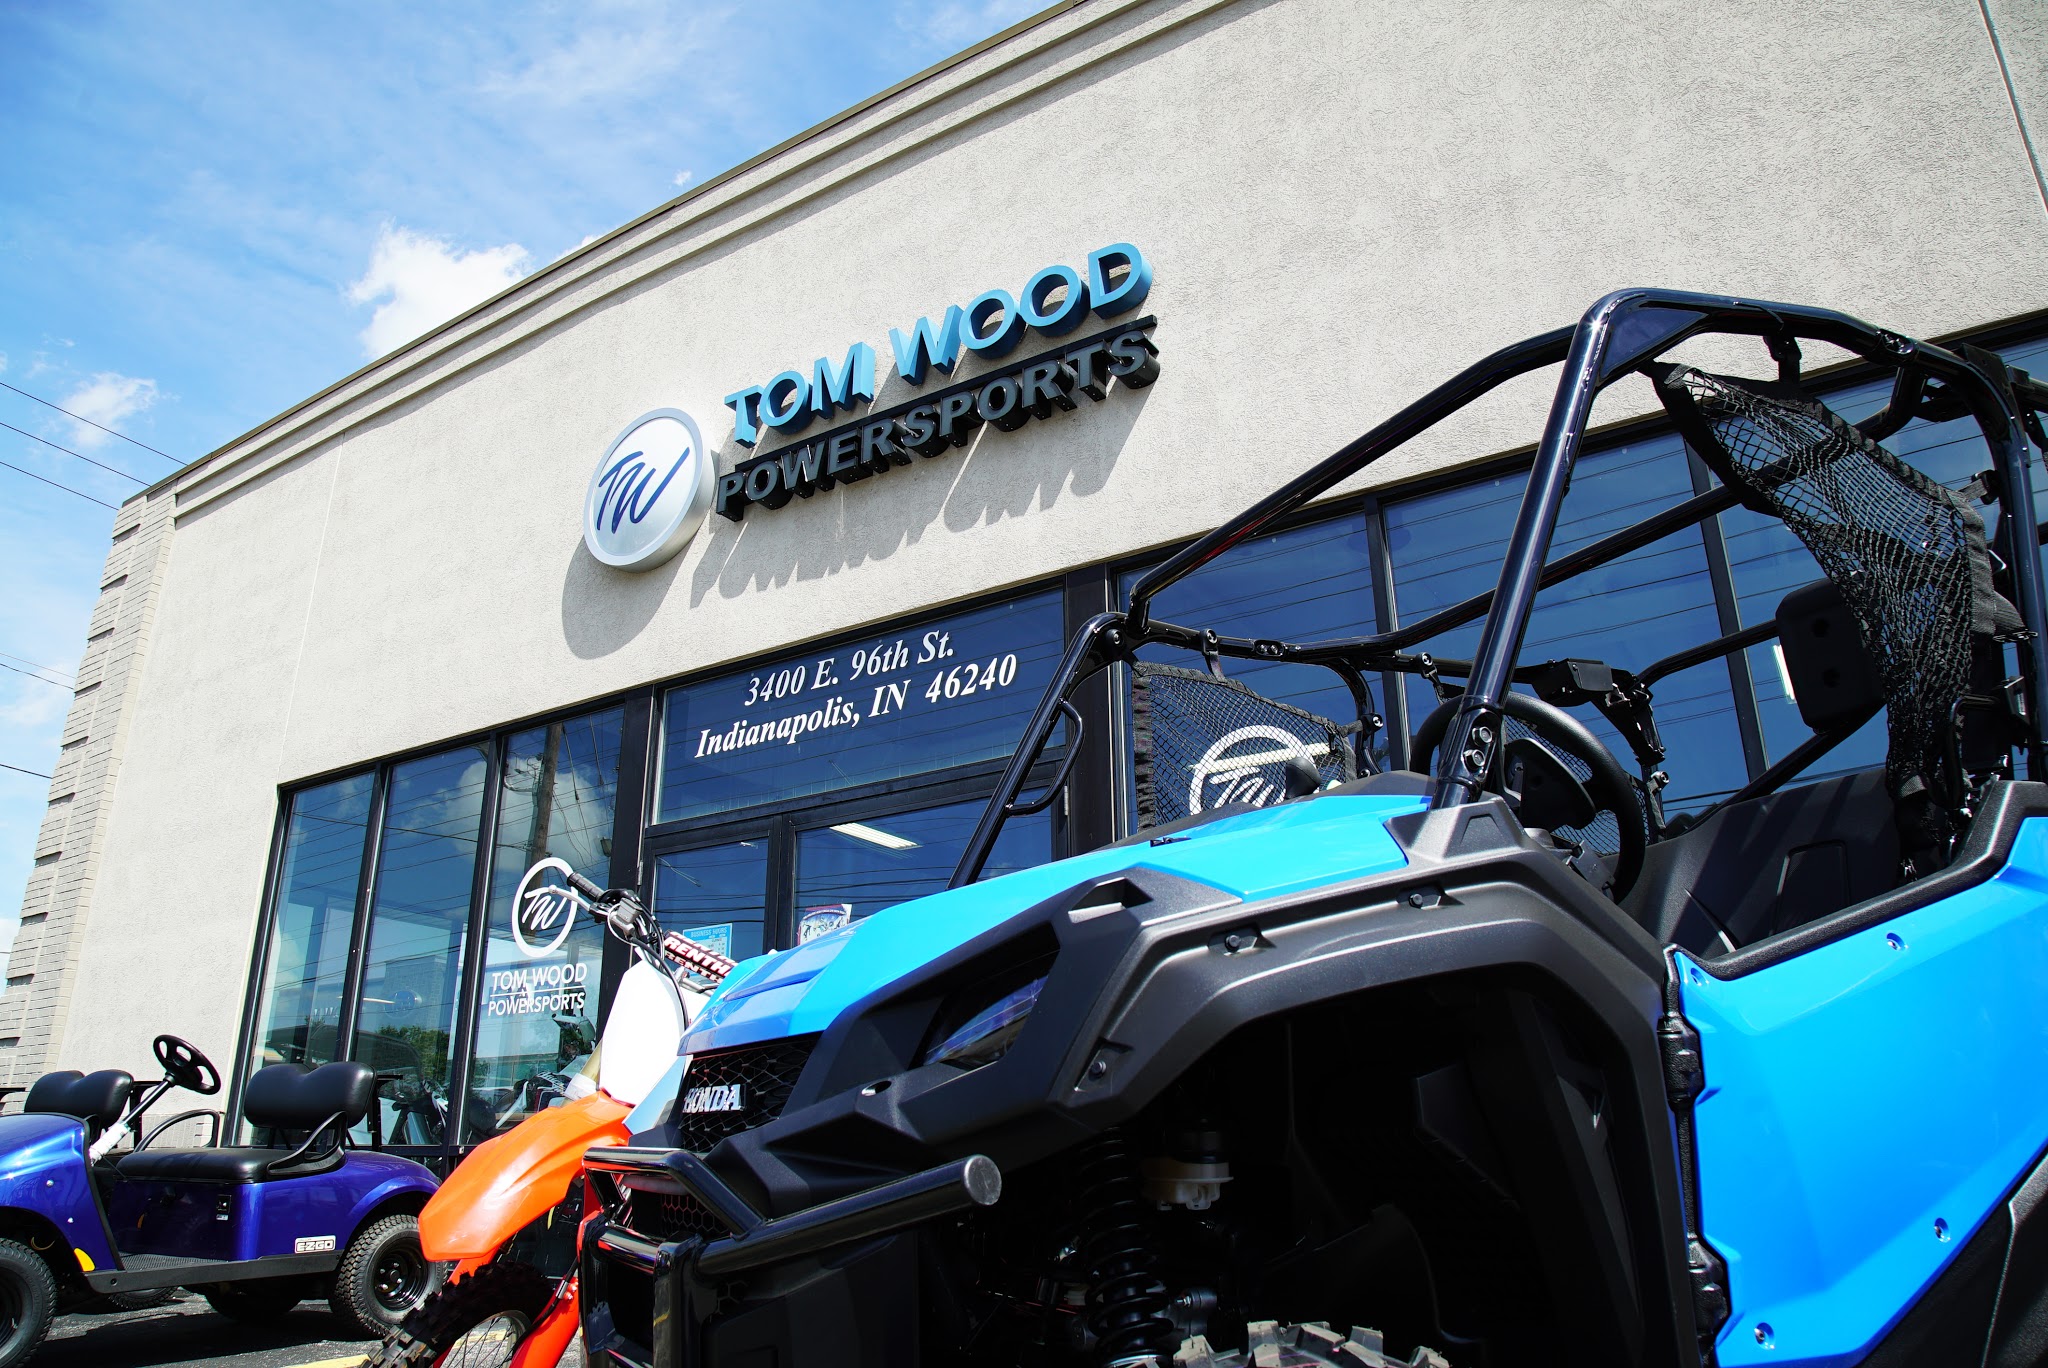 Tom Wood Powersports Indy reviews | 3400 East 96th Street - Indianapolis IN